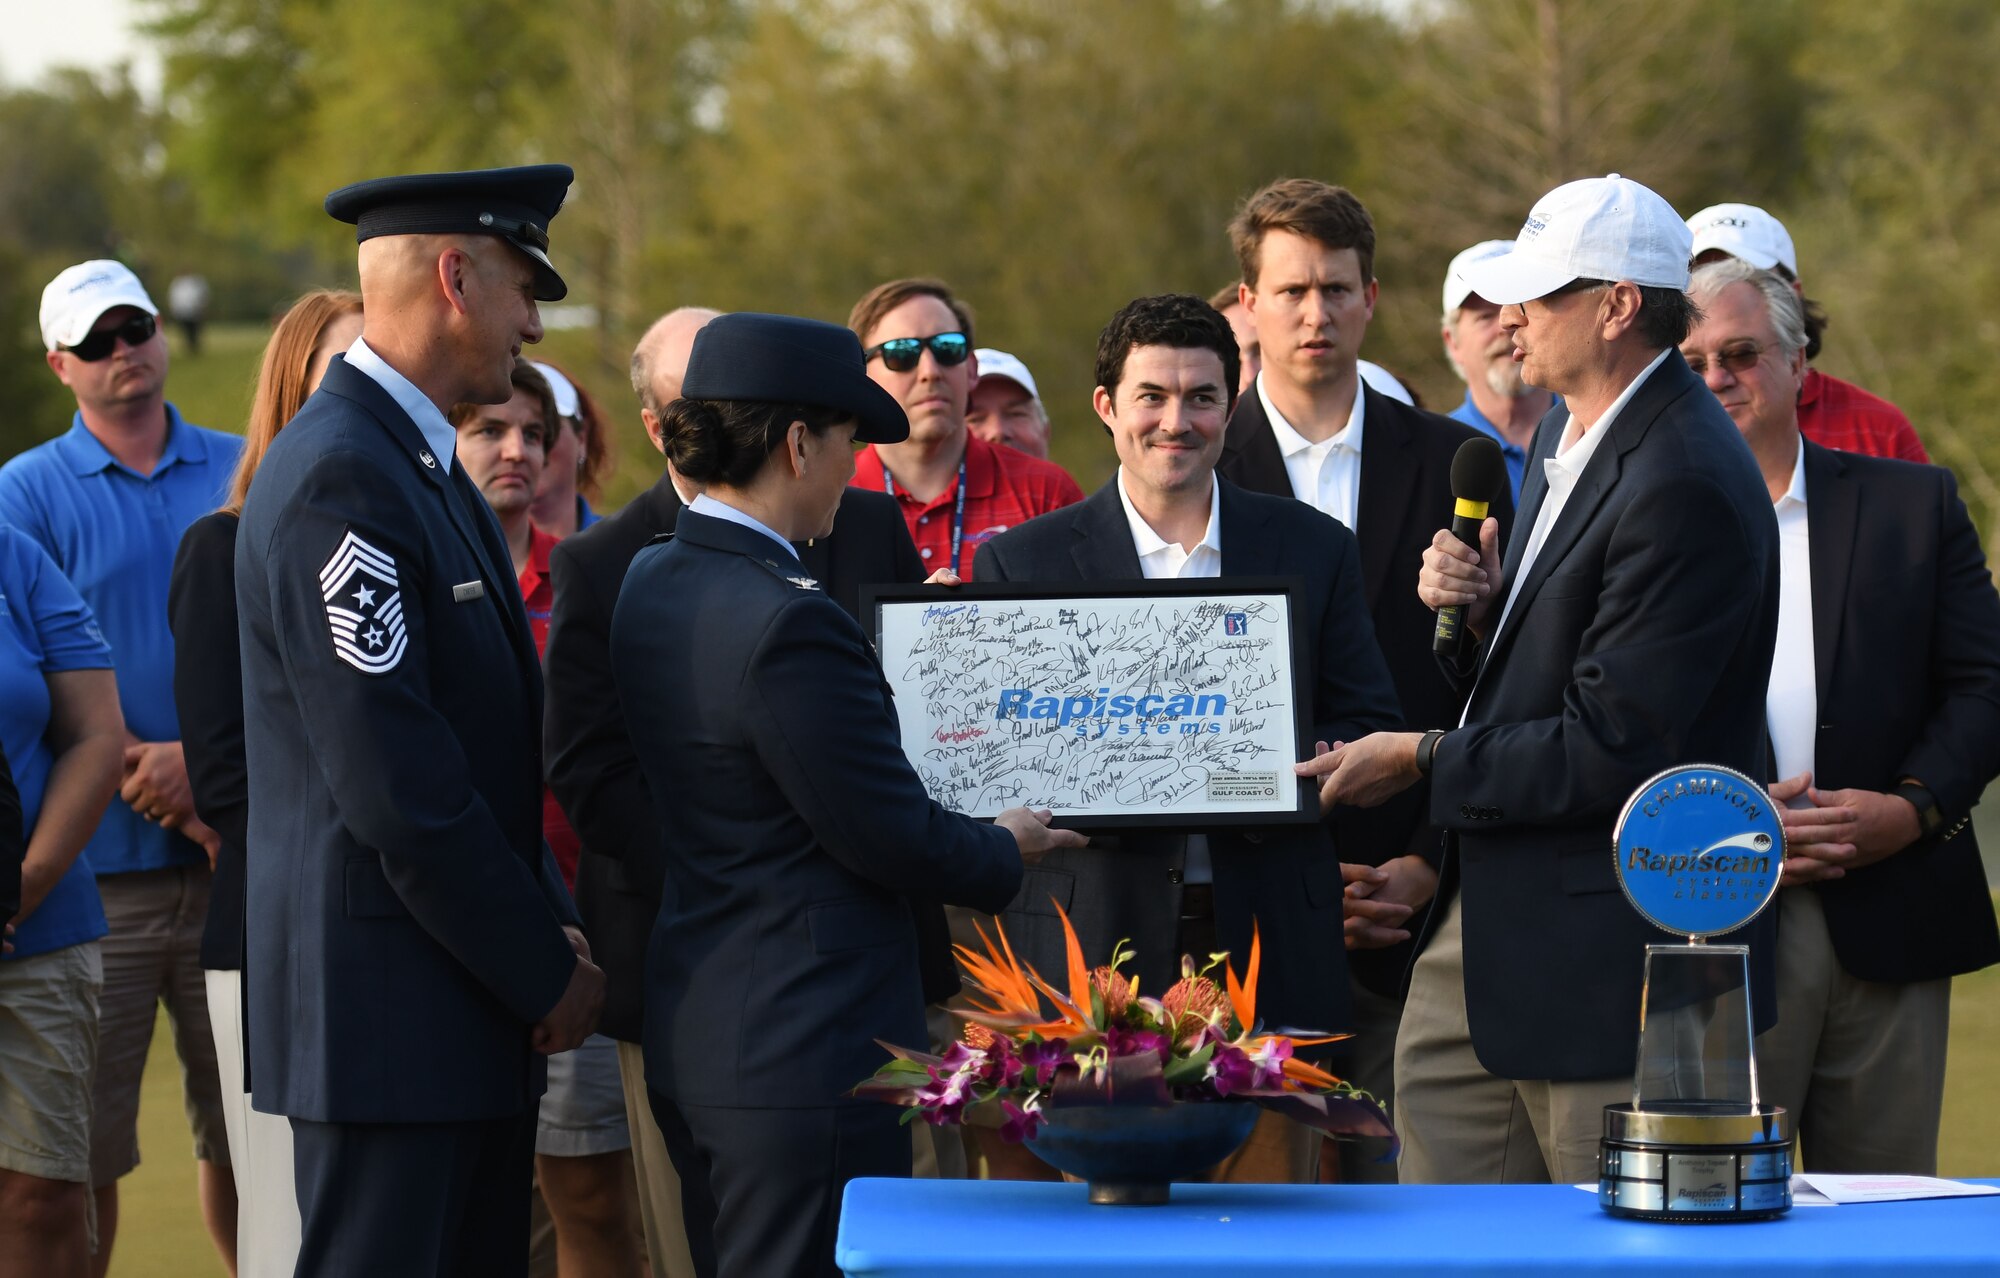 Ajay Mehra, Rapiscan Systems president, presents U.S. Air Force Col. Debra Lovette, 81st Training Wing commander and Chief Master Sgt. Kenneth Carter, Jr., 81st TRW command chief, with a memento during the Rapiscan Systems Classic Champions Tour at Fallen Oak Golf Club March 25, 2018, in Saucier, Mississippi. Keesler personnel performed the national anthem and presented the colors during the closing ceremony of the three-day event. (U.S. Air Force photo by Kemberly Groue)